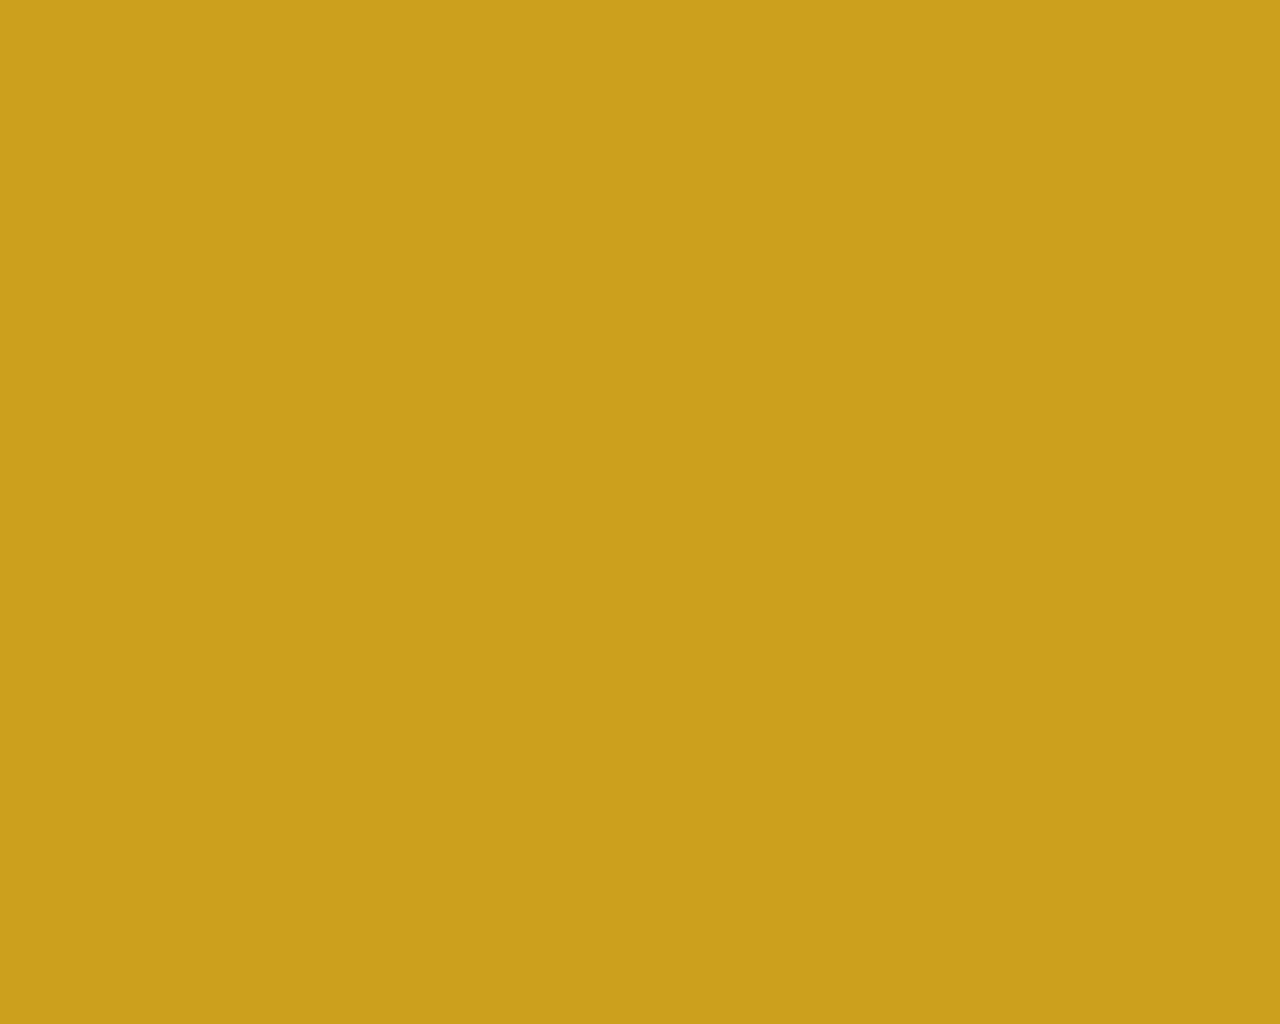 1280x1024 Lemon Curry Solid Color Background